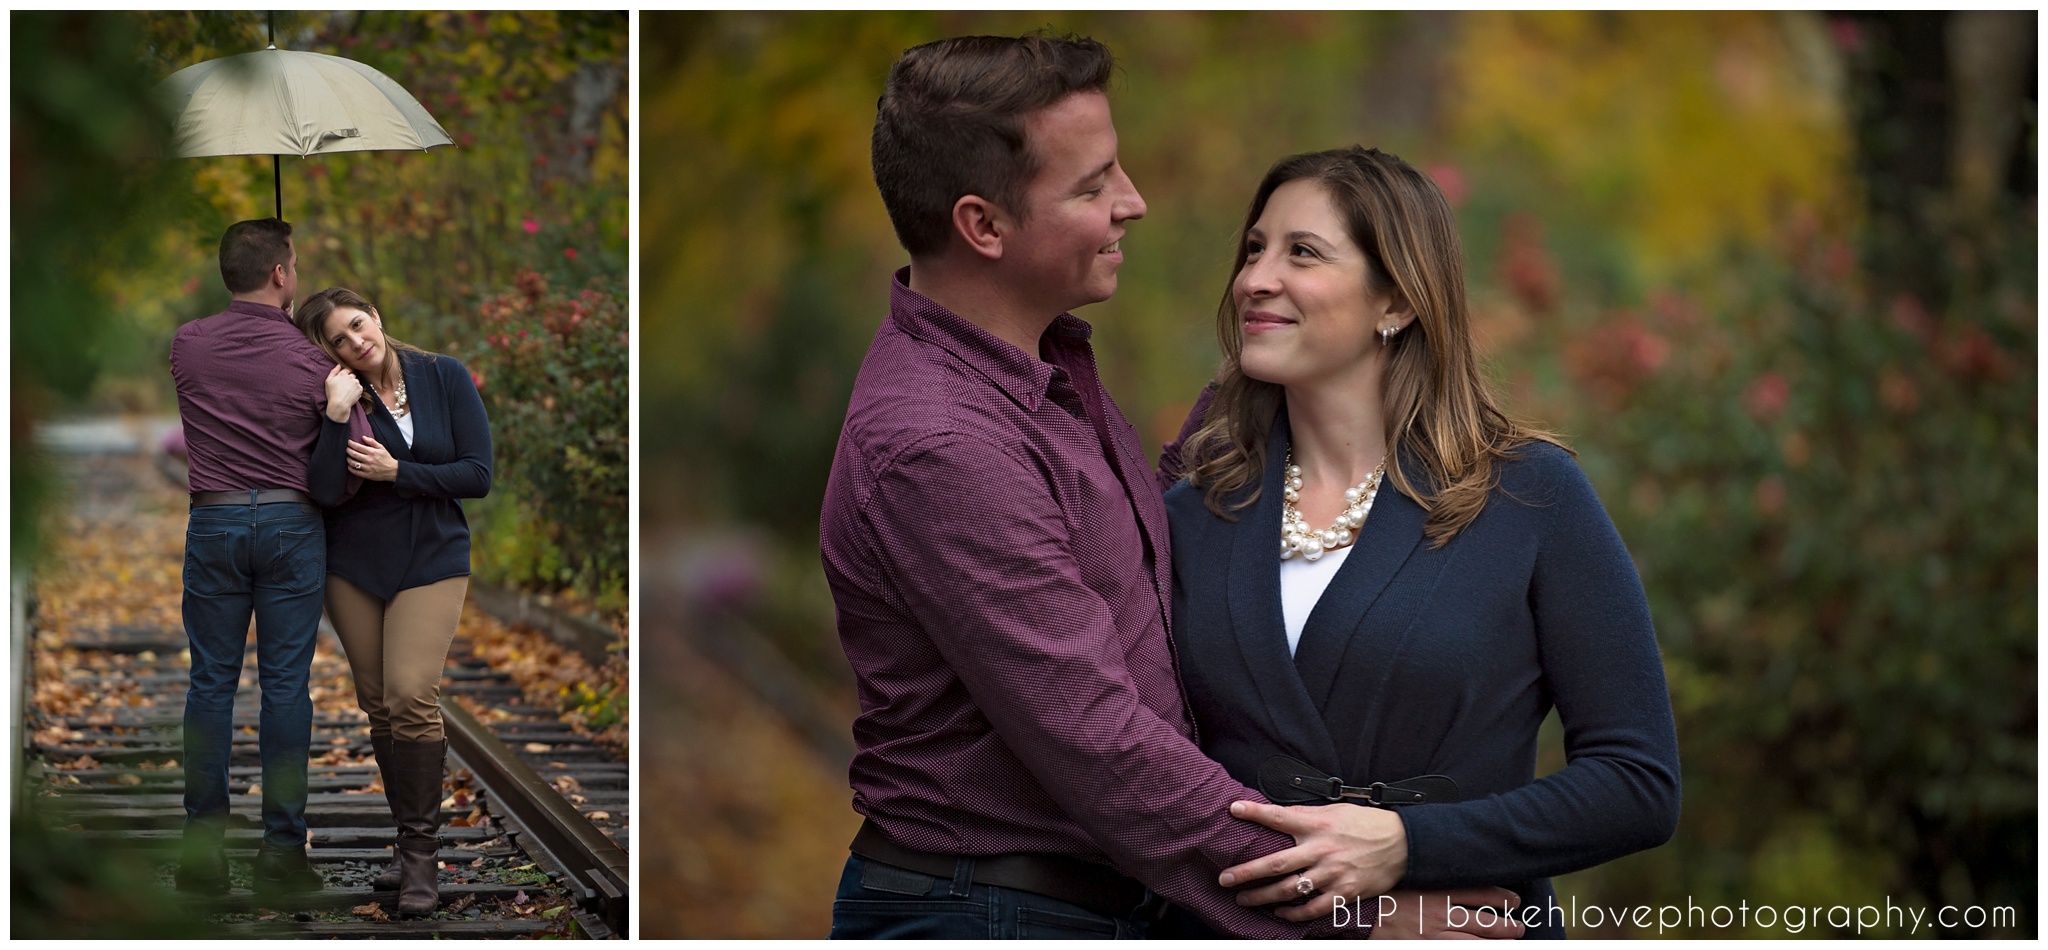 caffe galleria, lambertville, nj, engagement session, nj engagement, south jersey bride, nj bride, new jersey bride, fall engagement, november engagement, caffeegallerianj, getting married, future mr and mrs, soon to be married, bokeh love photography